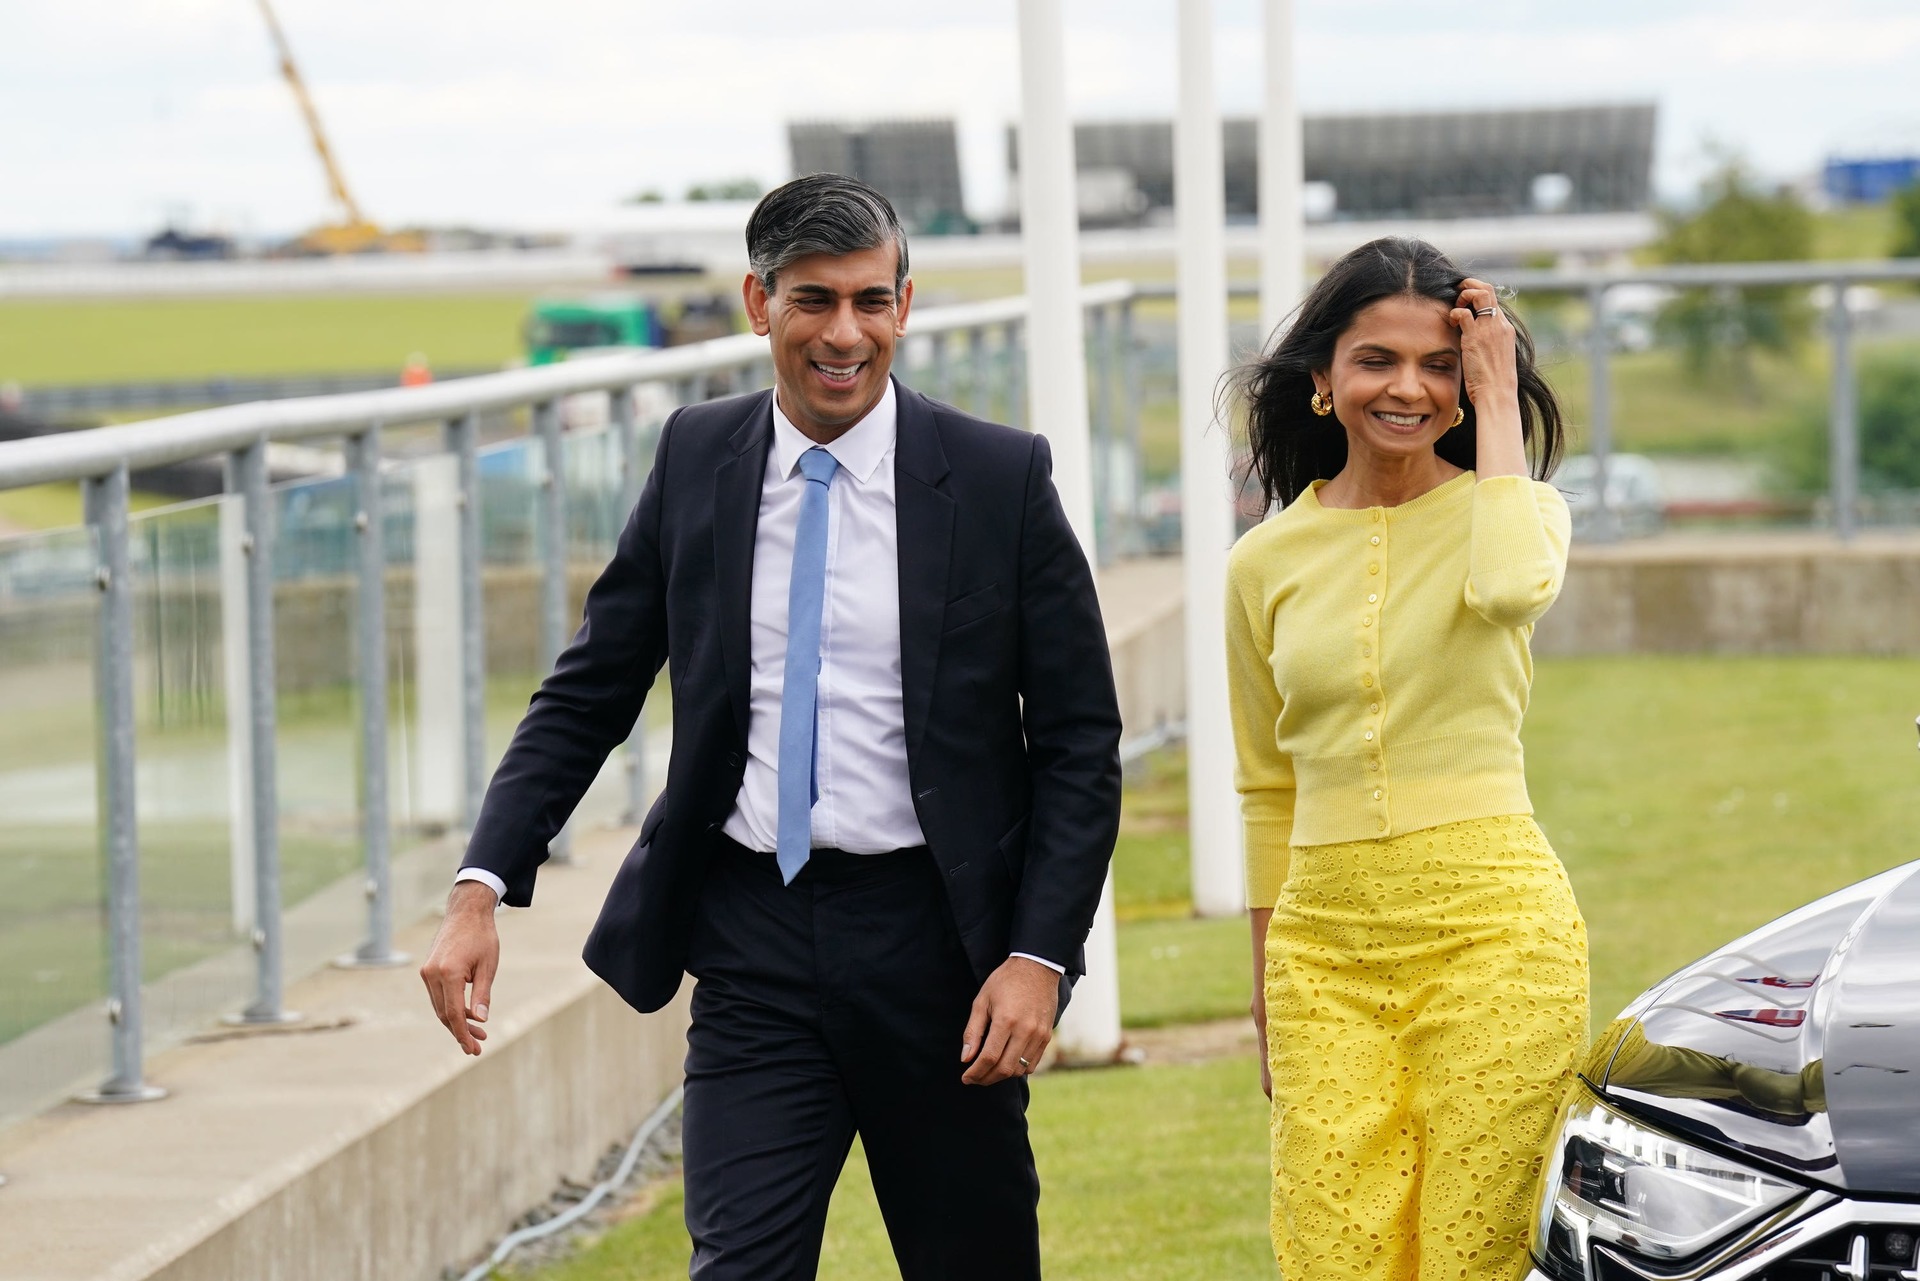 Prime Minister Rishi Sunak was joined by his wife Akshata Murty for the manifesto launch at Silverstone.